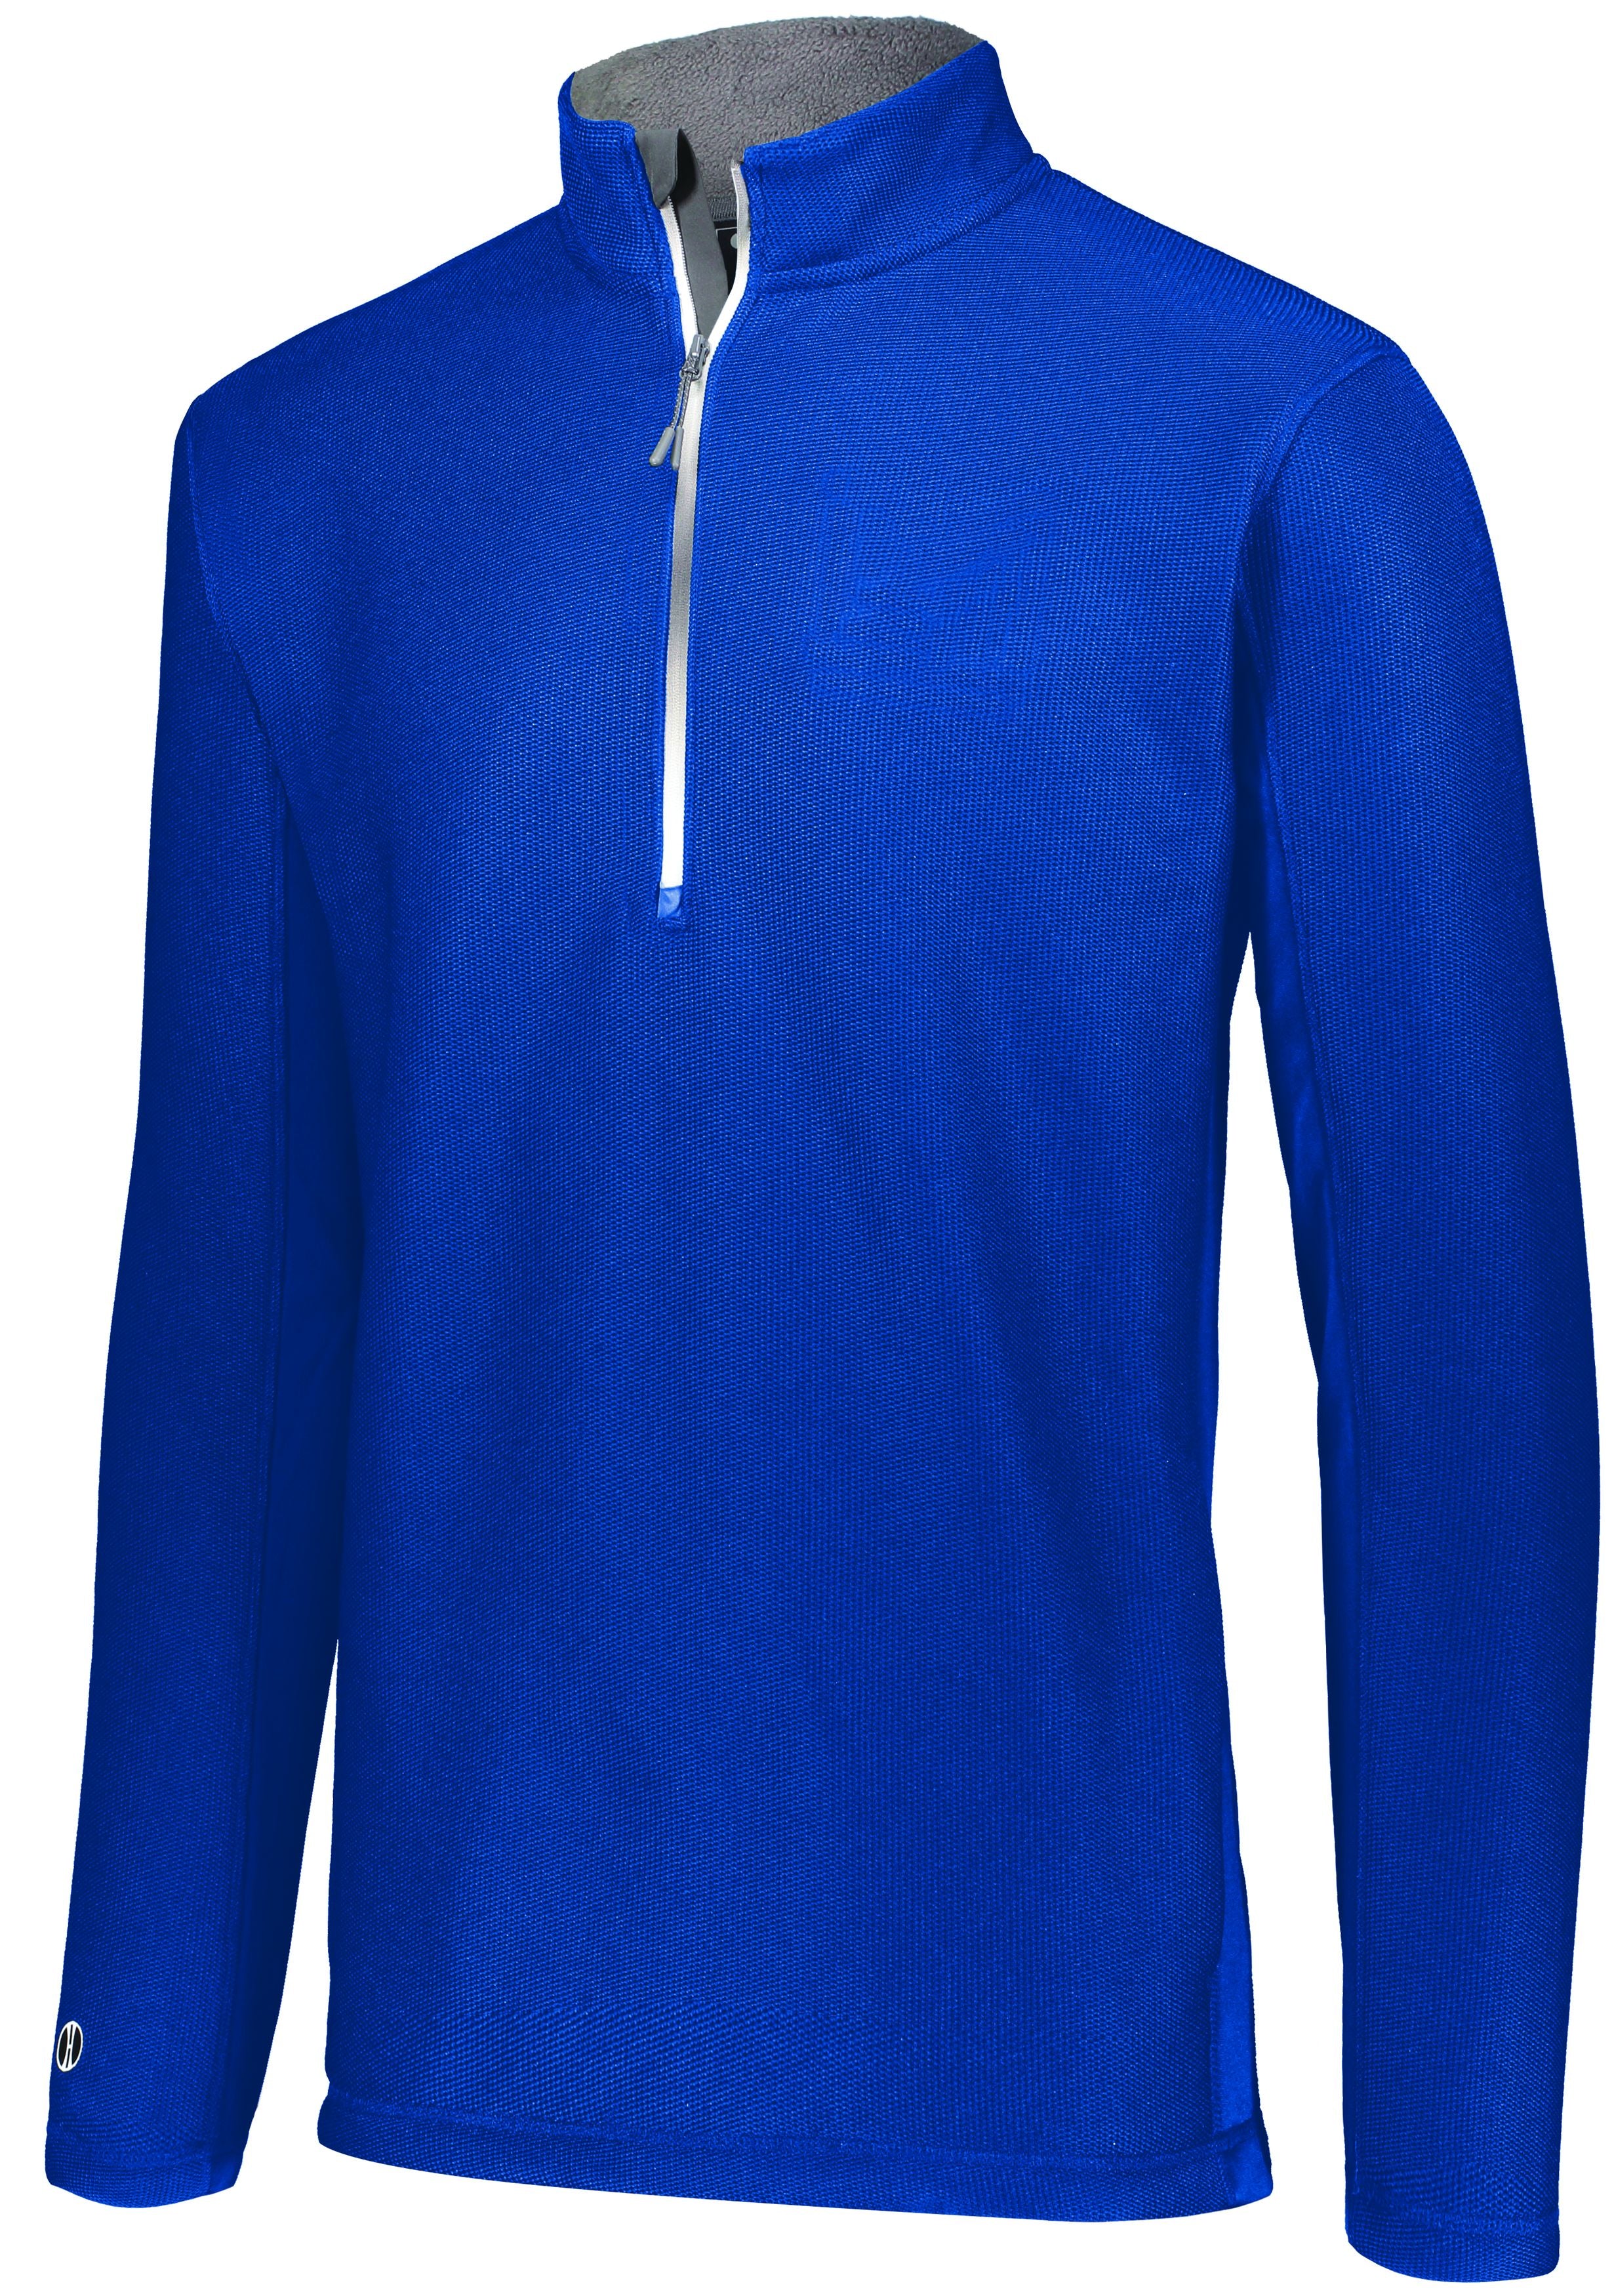 Holloway Invert 1/2 Zip Pullover in Royal  -Part of the Adult, Adult-Pullover, Holloway, Outerwear, Invert-Collection product lines at KanaleyCreations.com